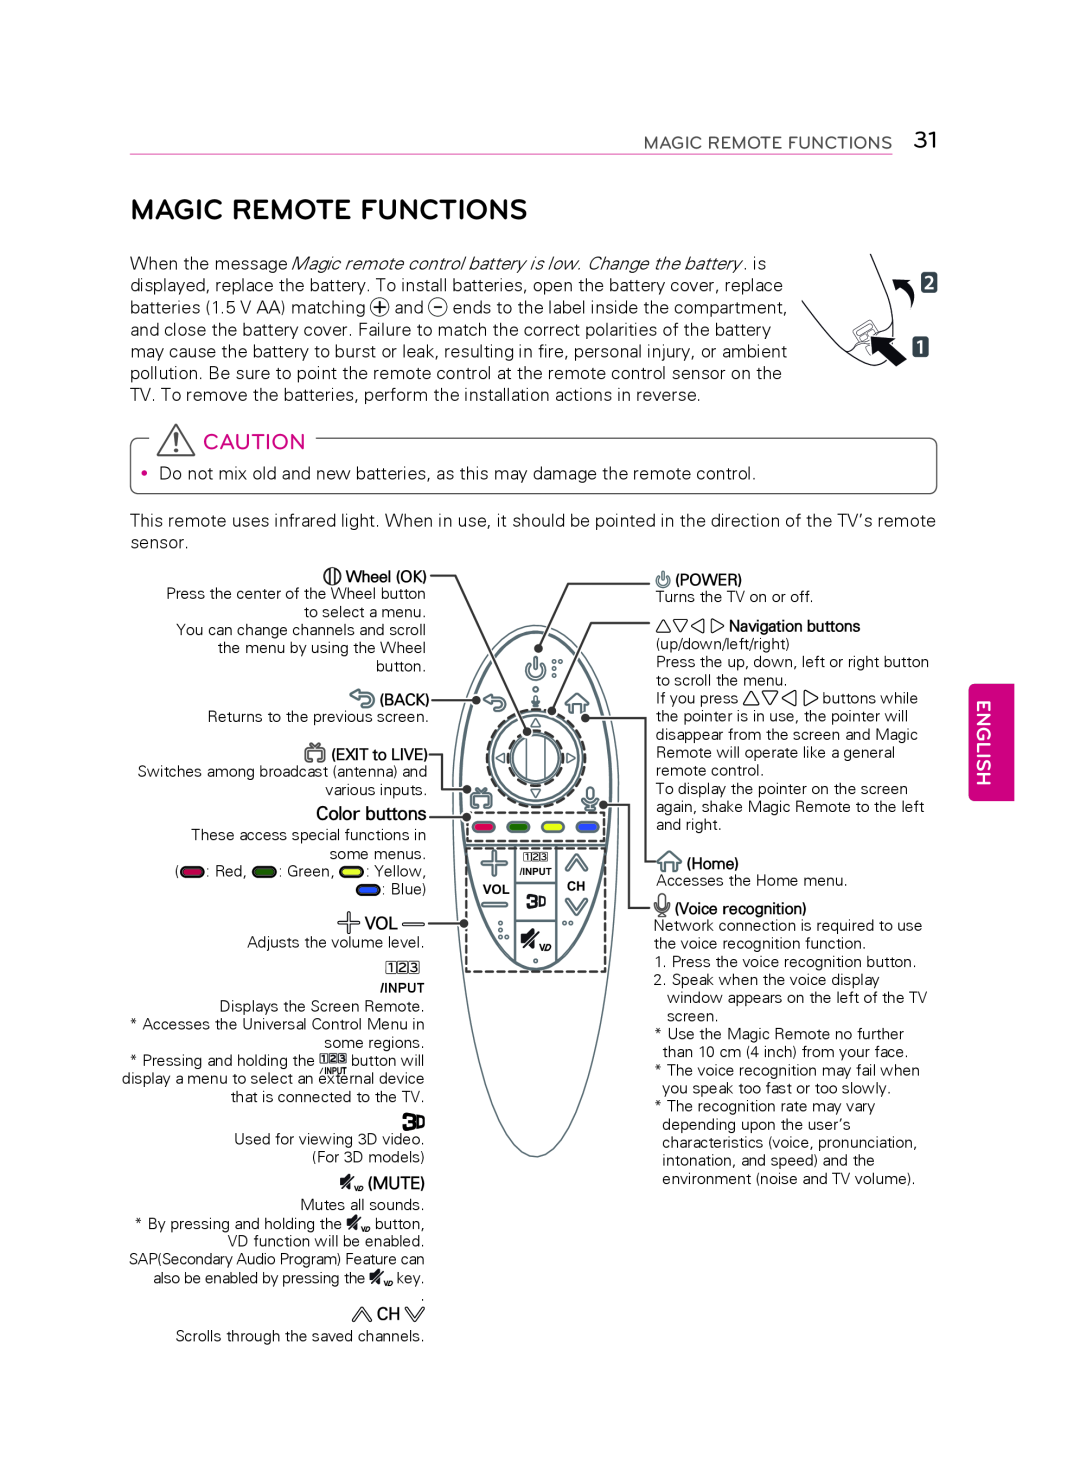 LG Electronics 50LB6300 owner manual Magic Remote Functions, English, Color buttons 